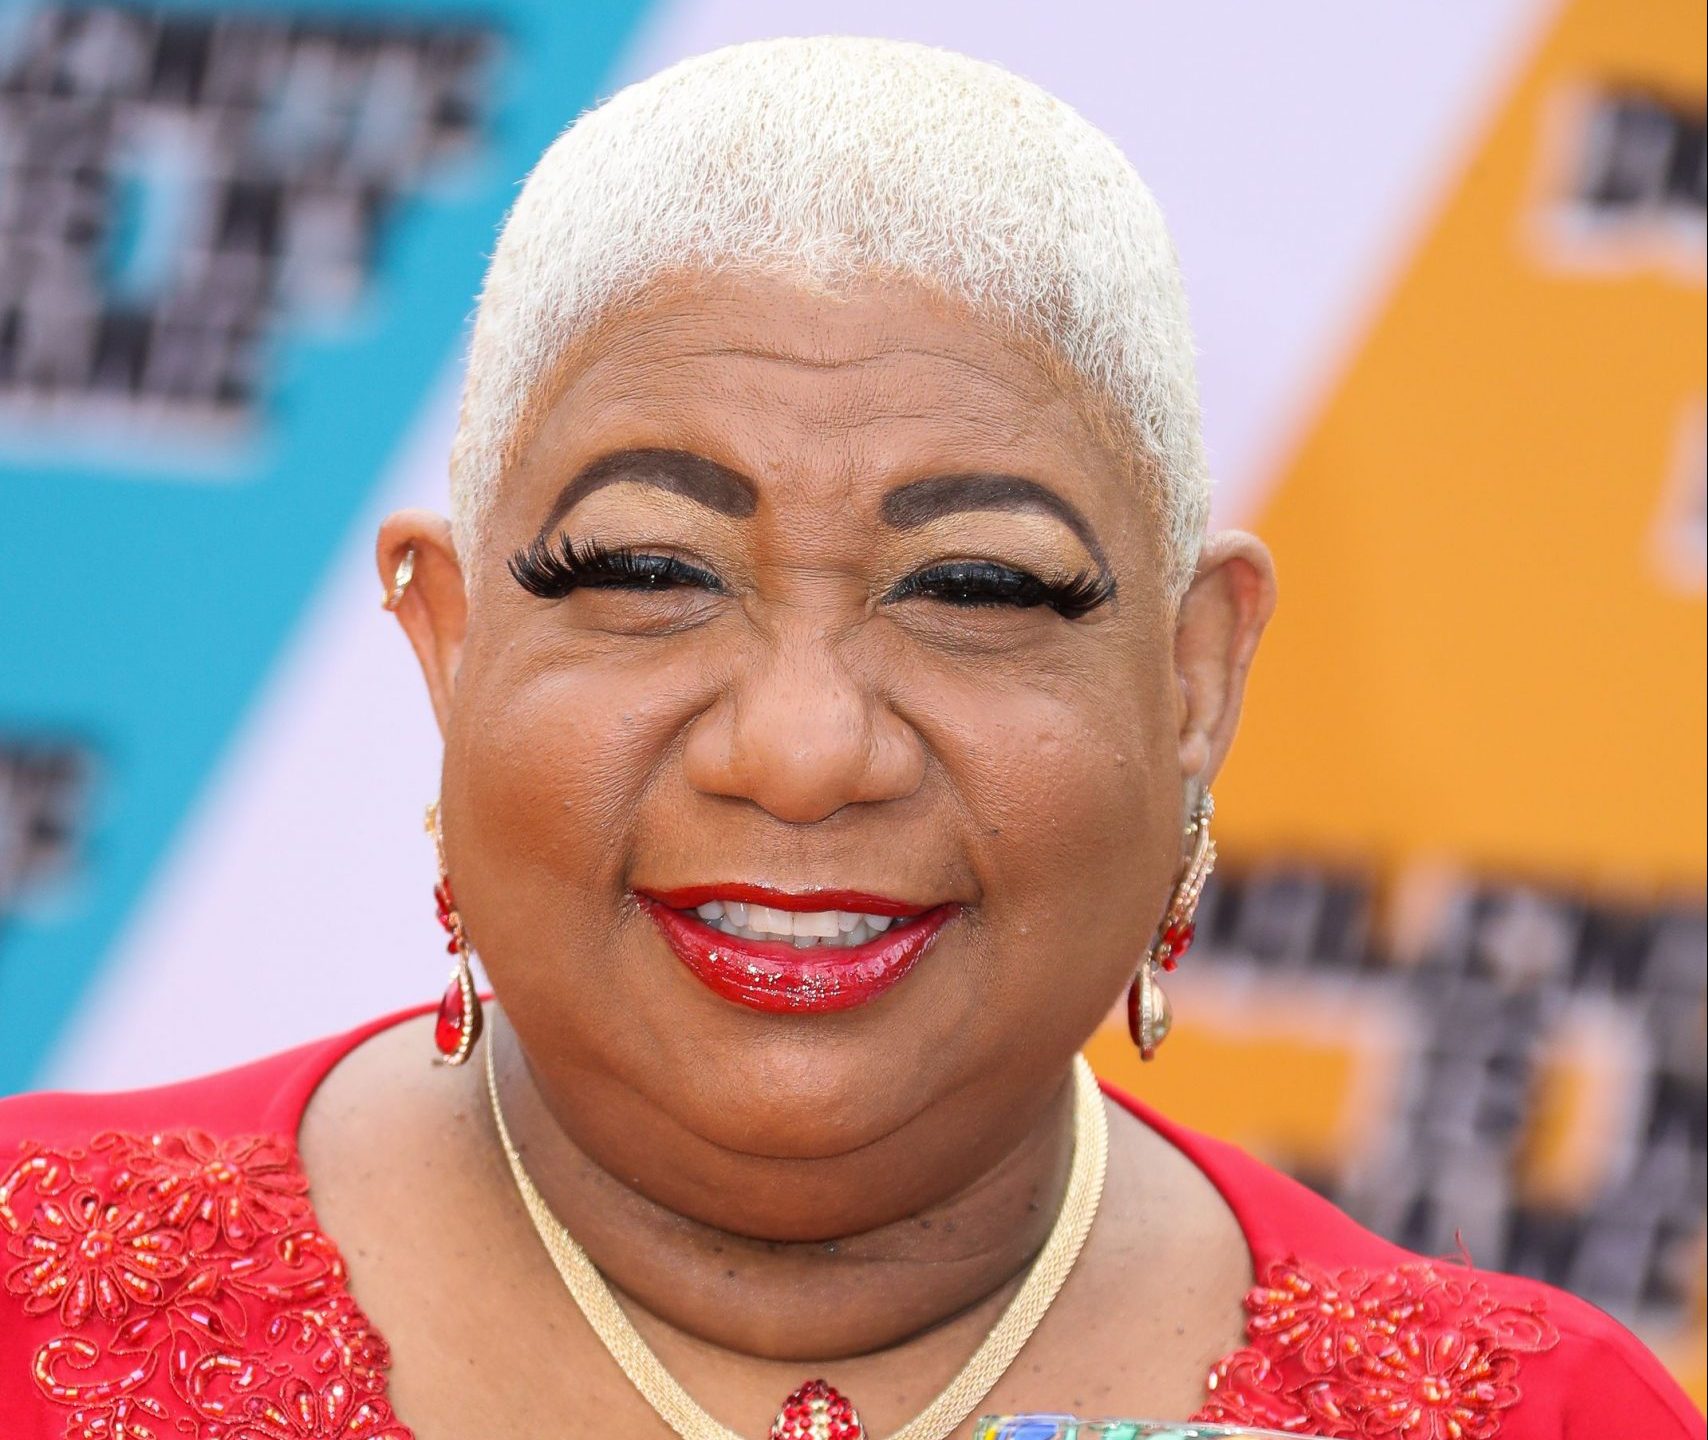 Luenell Reveals That She Went to Jail For Robbing a Bank Before Becoming a Famous Comedian